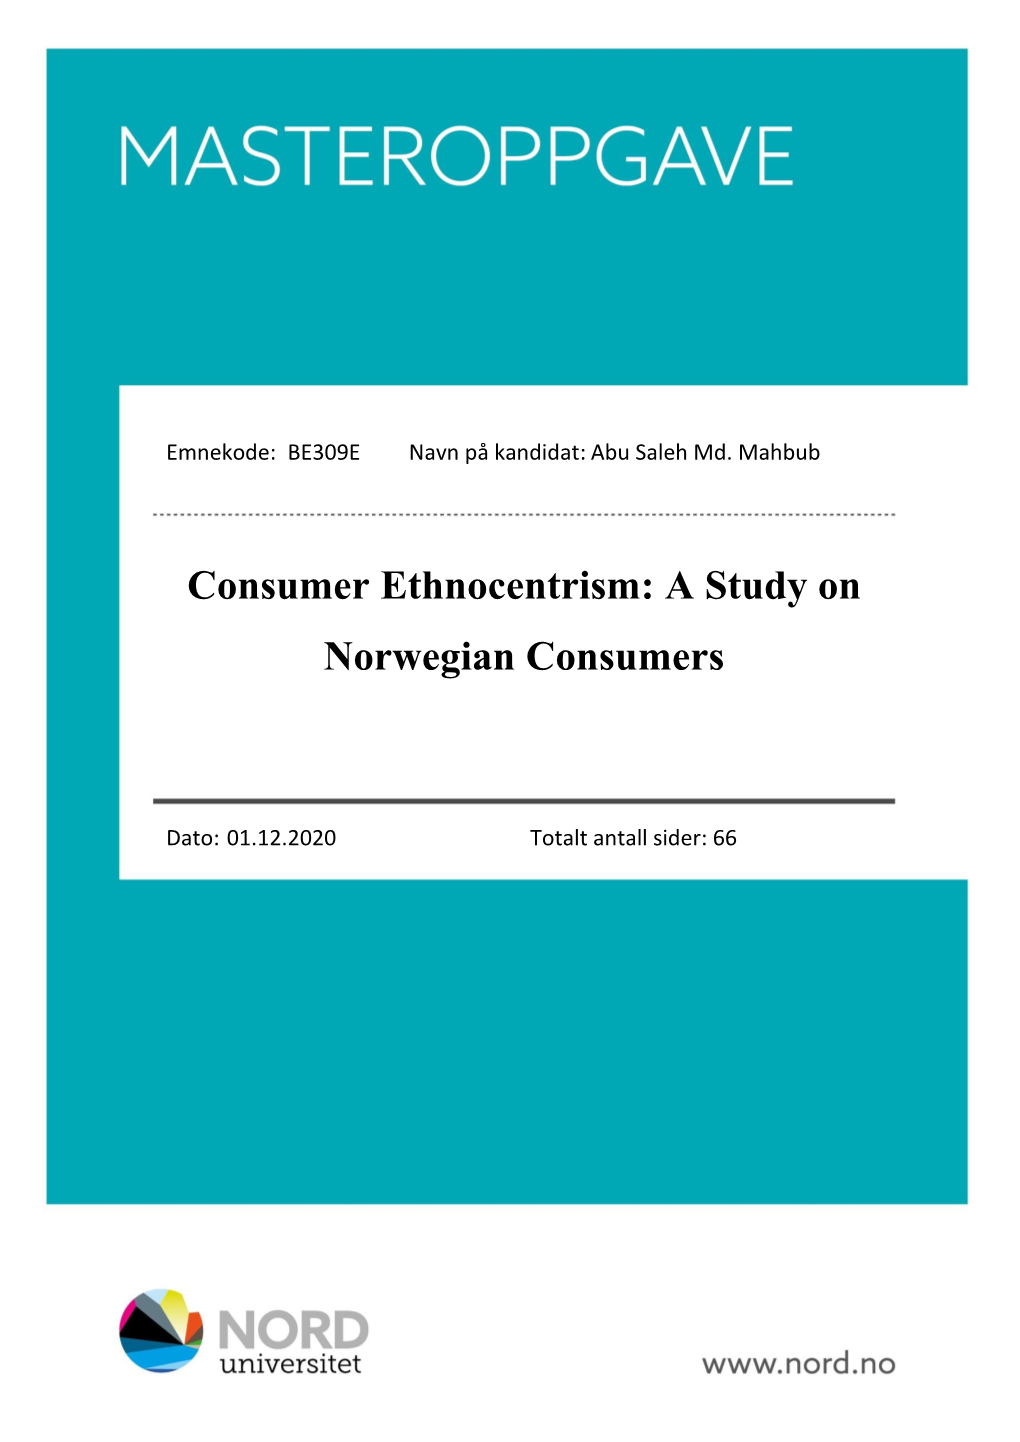 Consumer Ethnocentrism: a Study on Norwegian Consumers